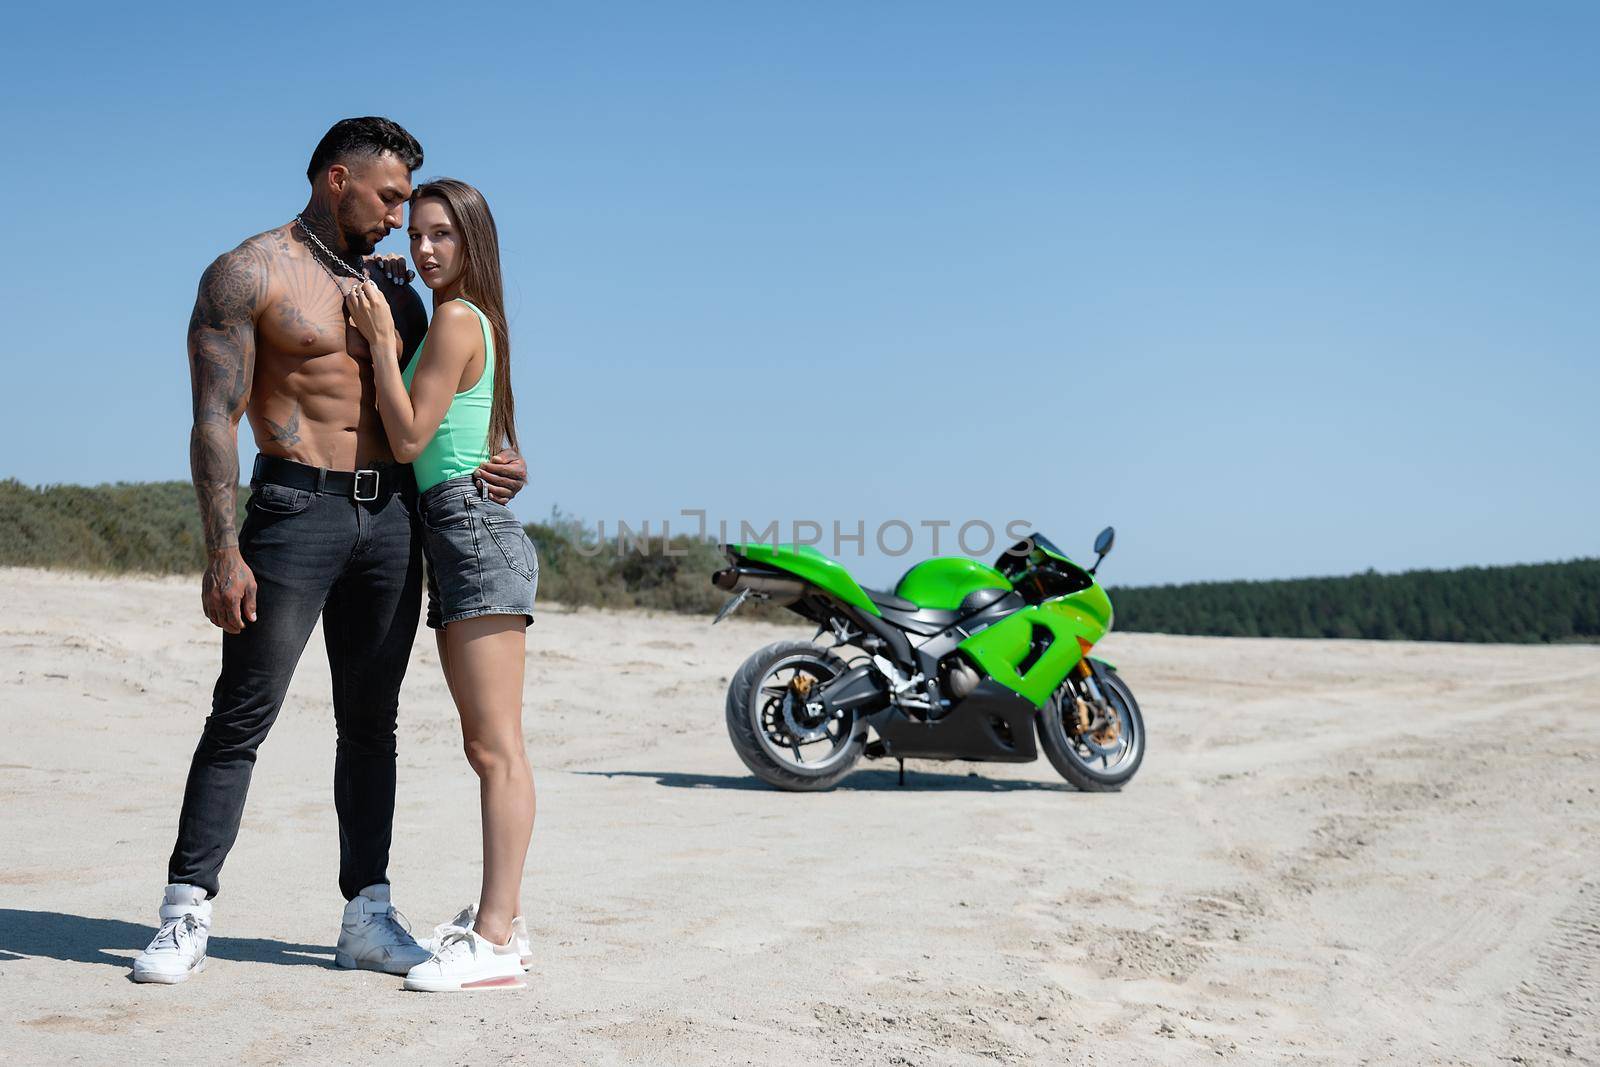 Serious male with tattoos and beard standing and embracing sensual girlfriend with long brown hair against green motorbike in sandy field in nature in sunny day